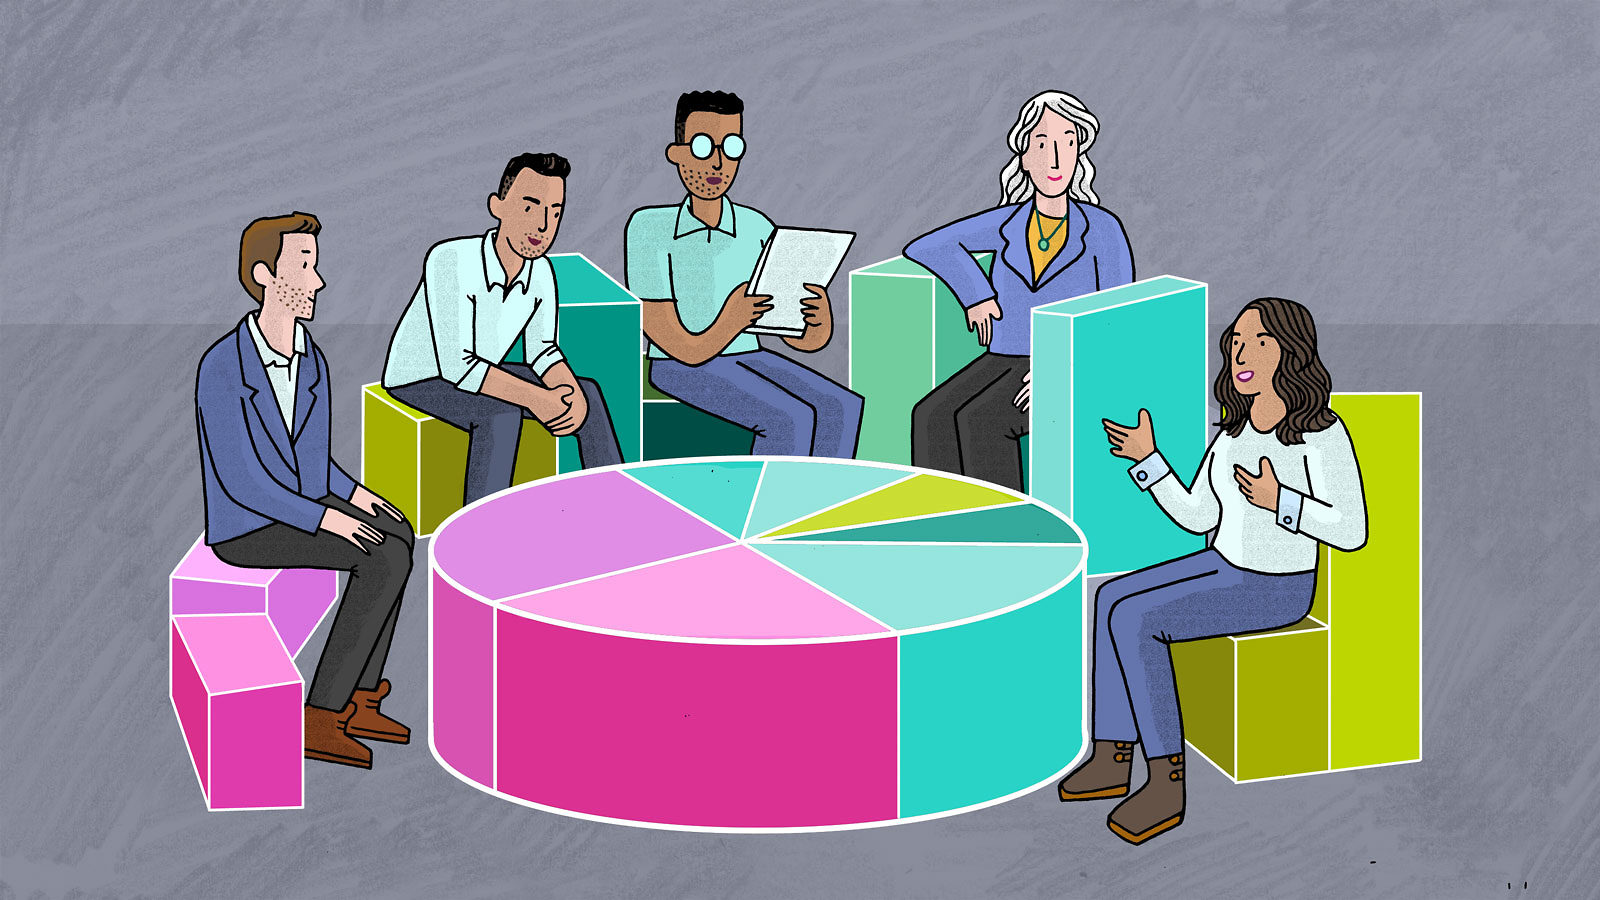 An illustration of a group of people having a discussion